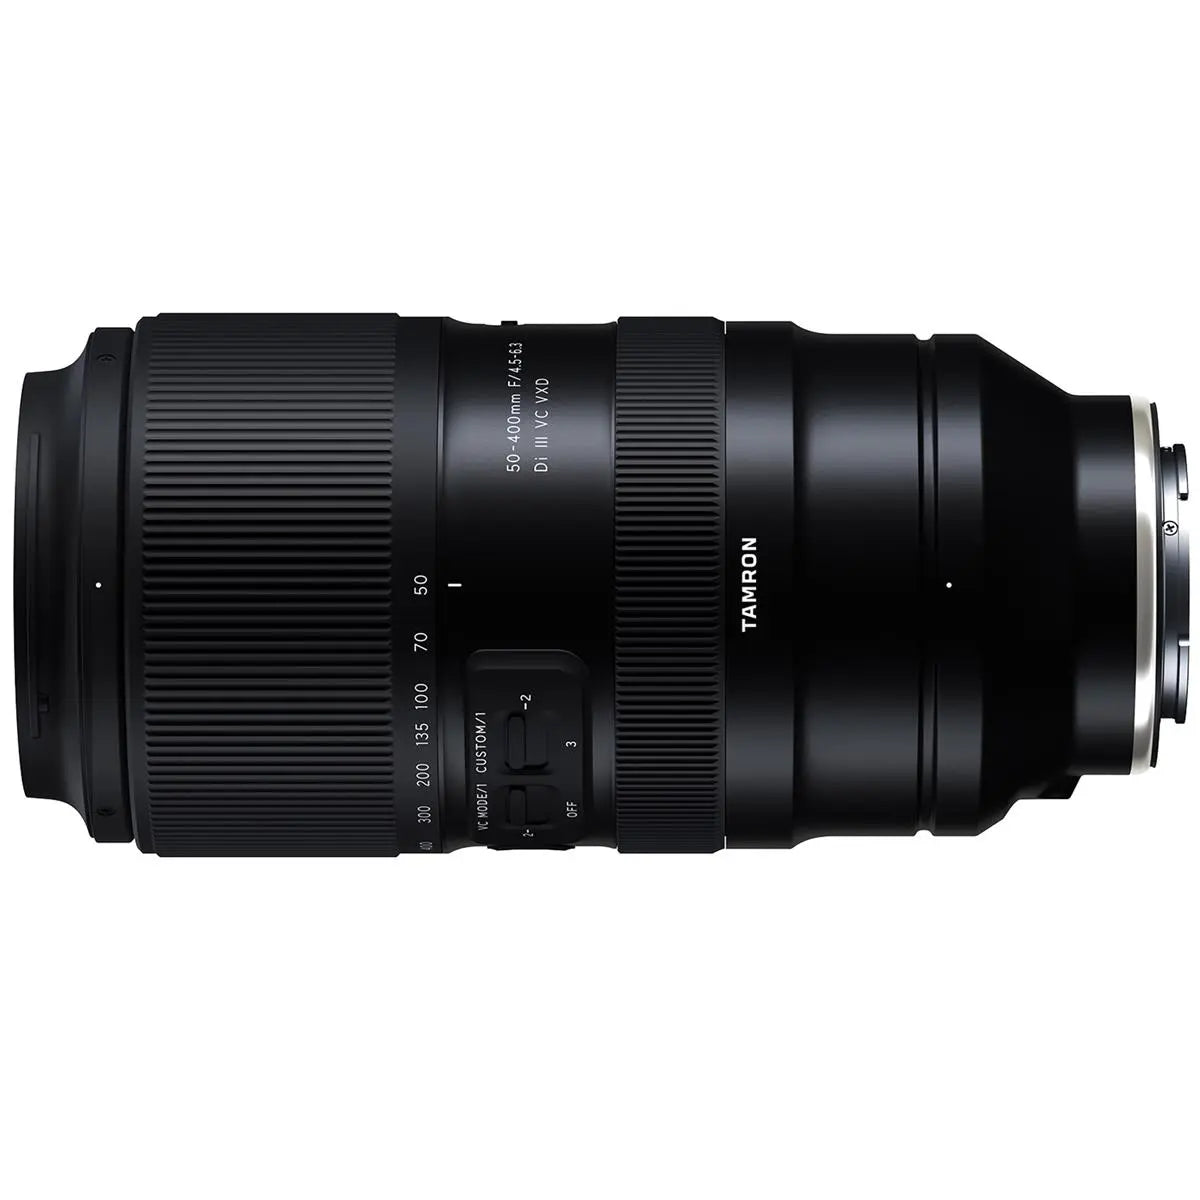 Tamron 50-400mm f/4.5-6.3 Di III VC VXD Lens for Sony